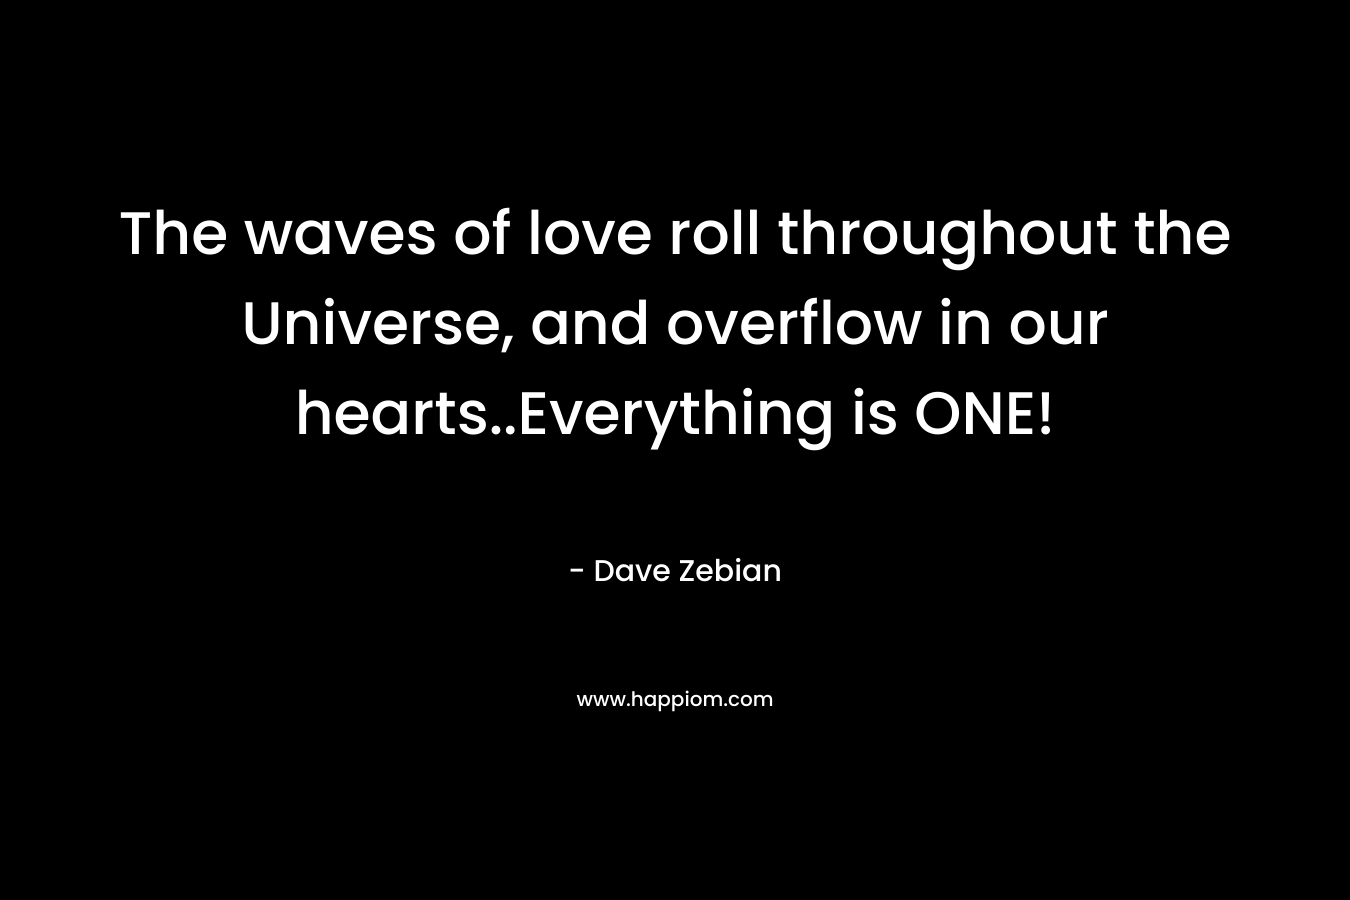 The waves of love roll throughout the Universe, and overflow in our hearts..Everything is ONE!